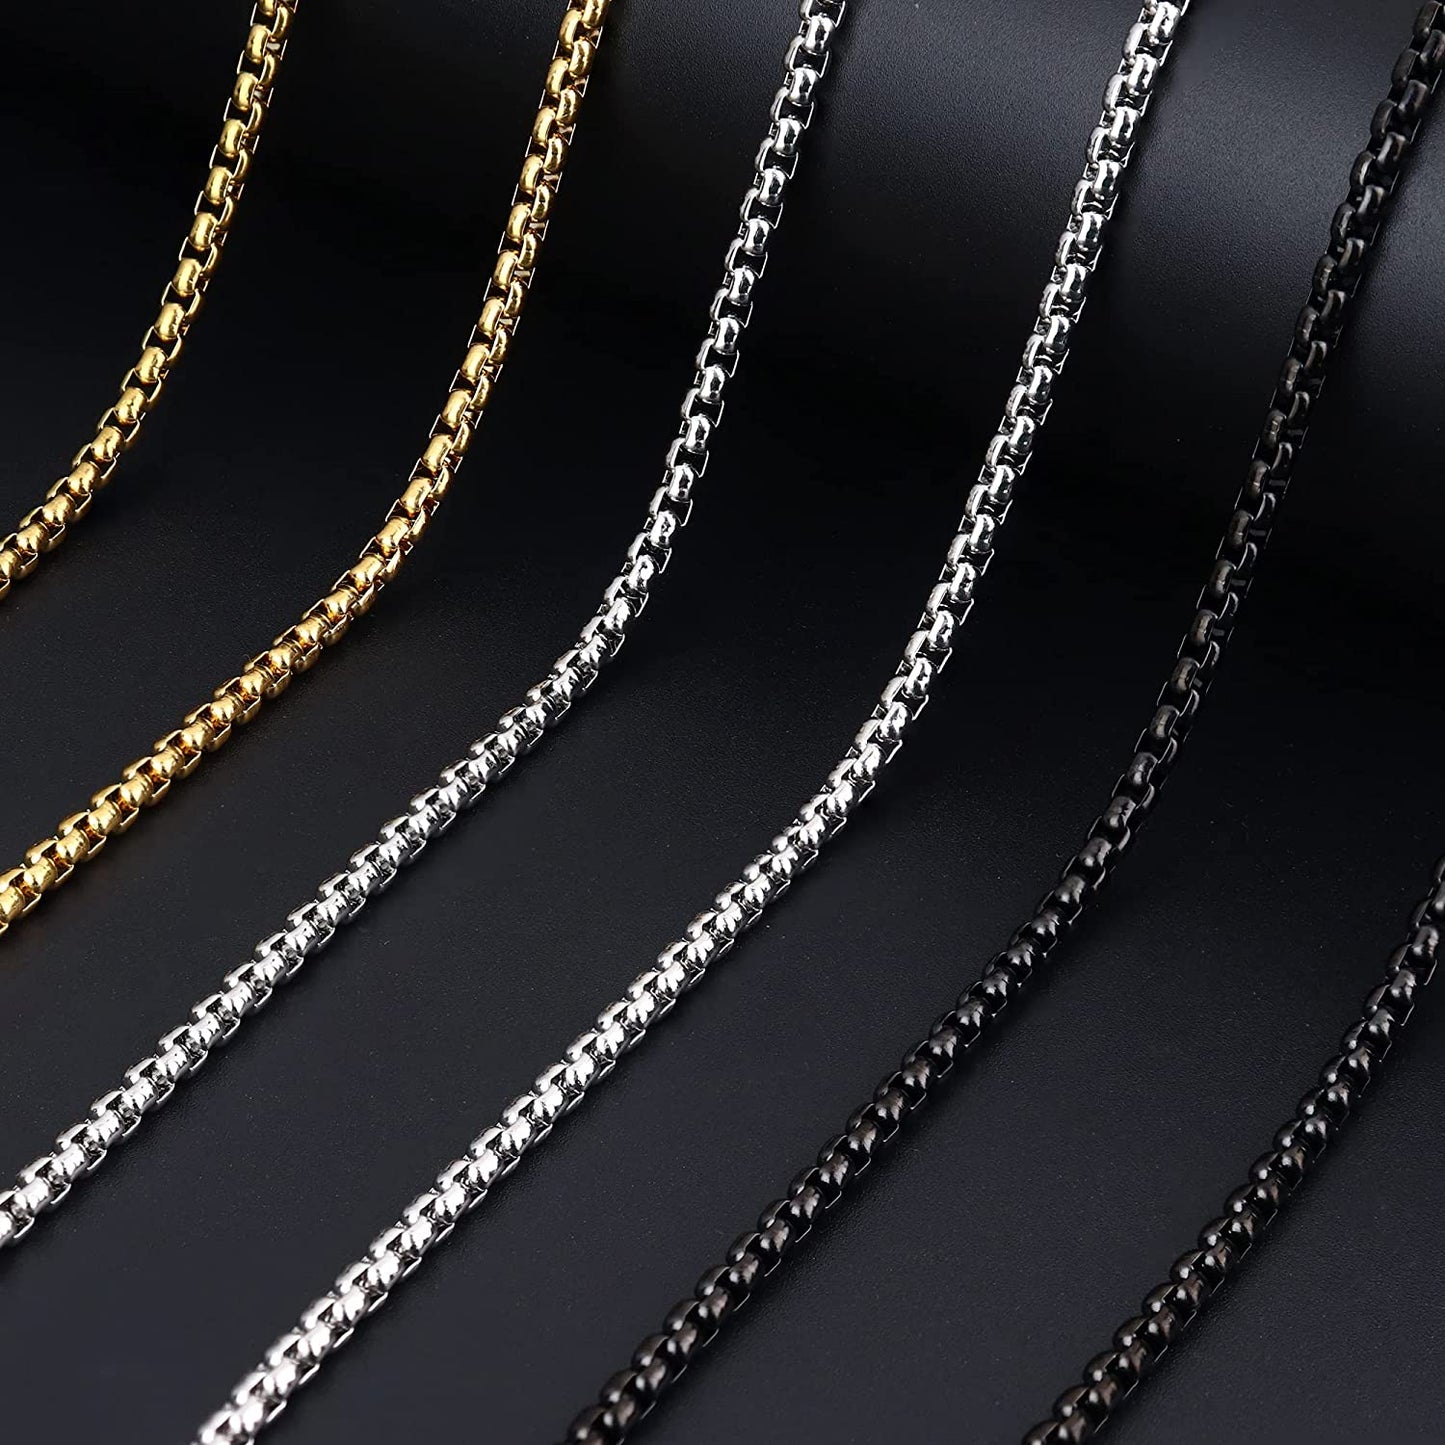 Jstyle 2-3.5MM Mens Womens Stainless Steel Rolo Cable Chain Necklace, Square Rolo Chain Necklace for Men Women 16-24 Inch